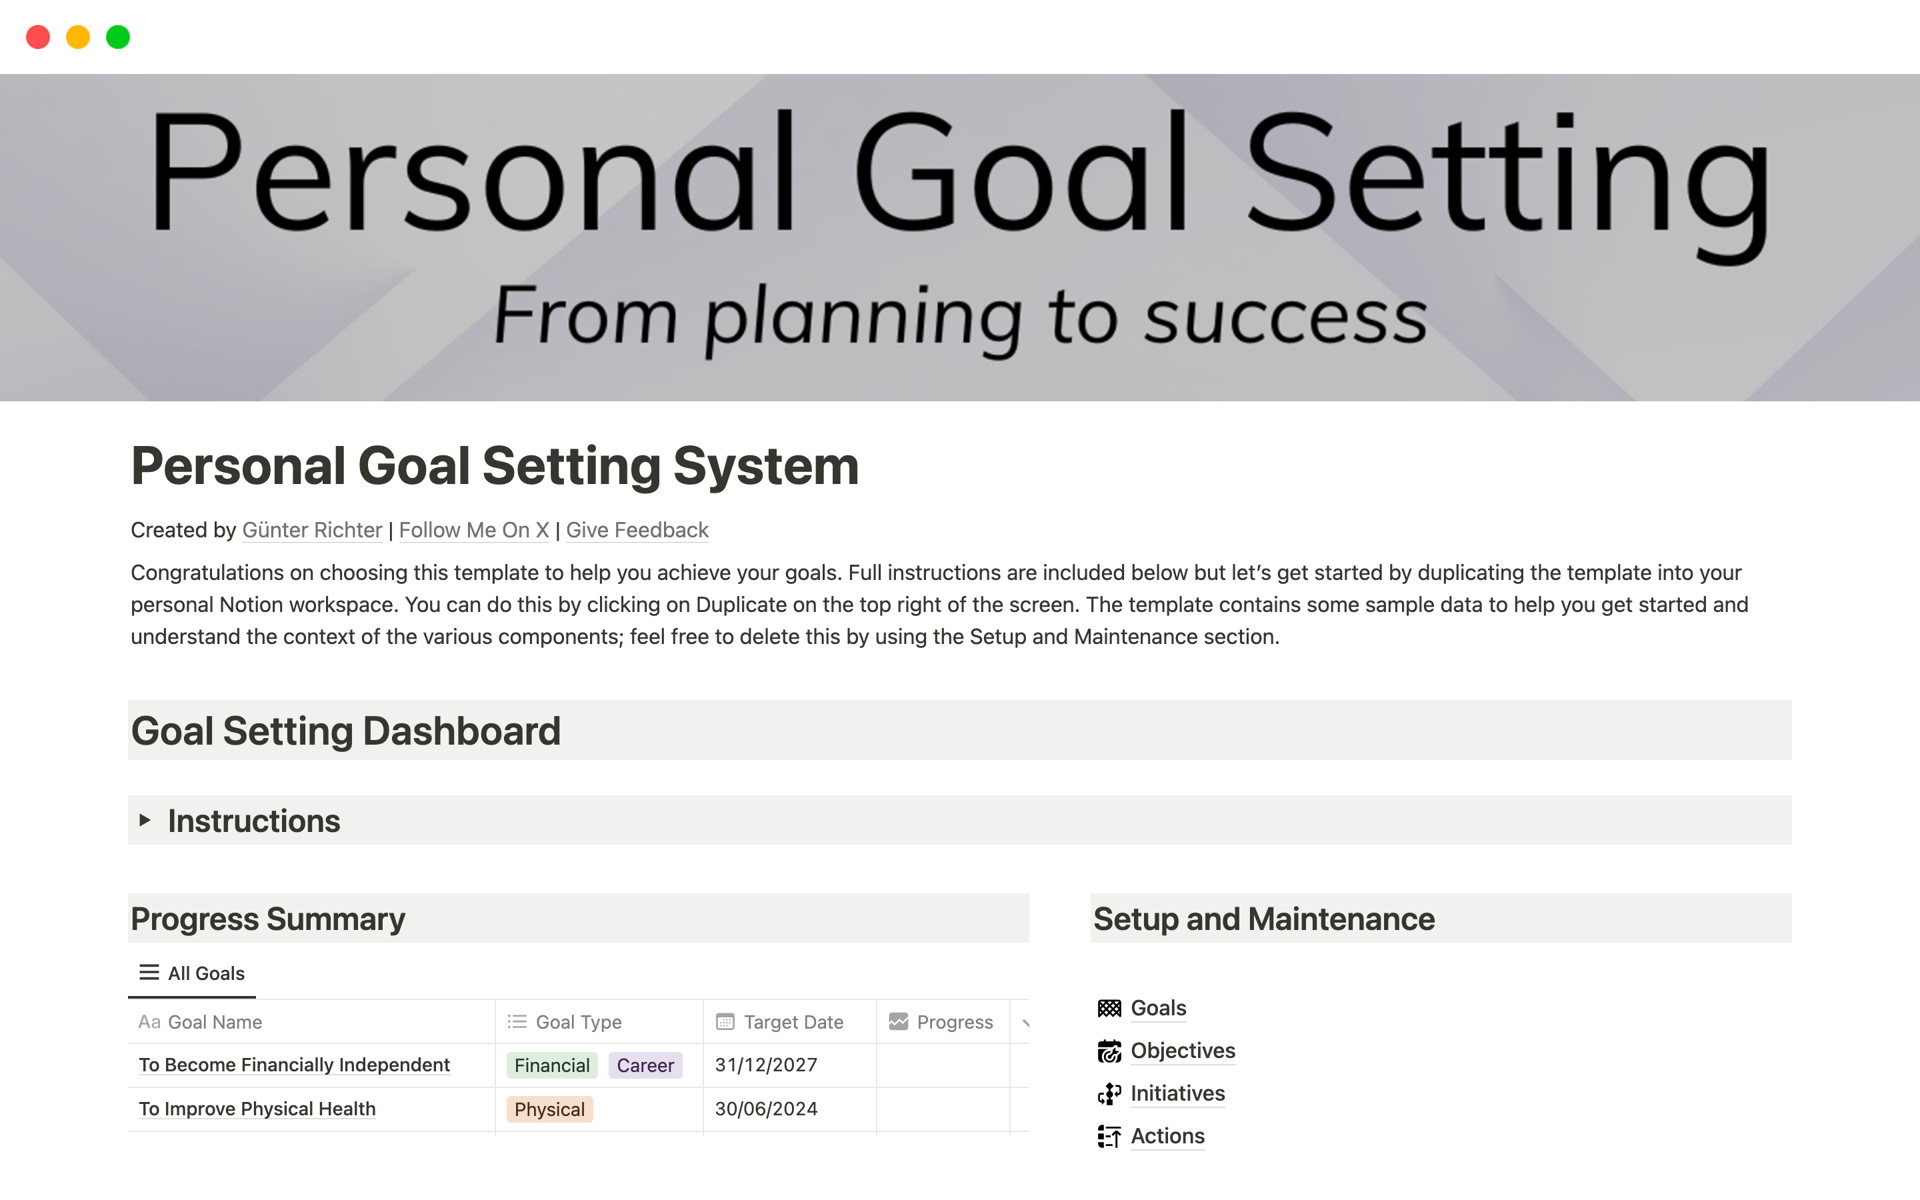 A template to help you plan and achieve your personal goals.